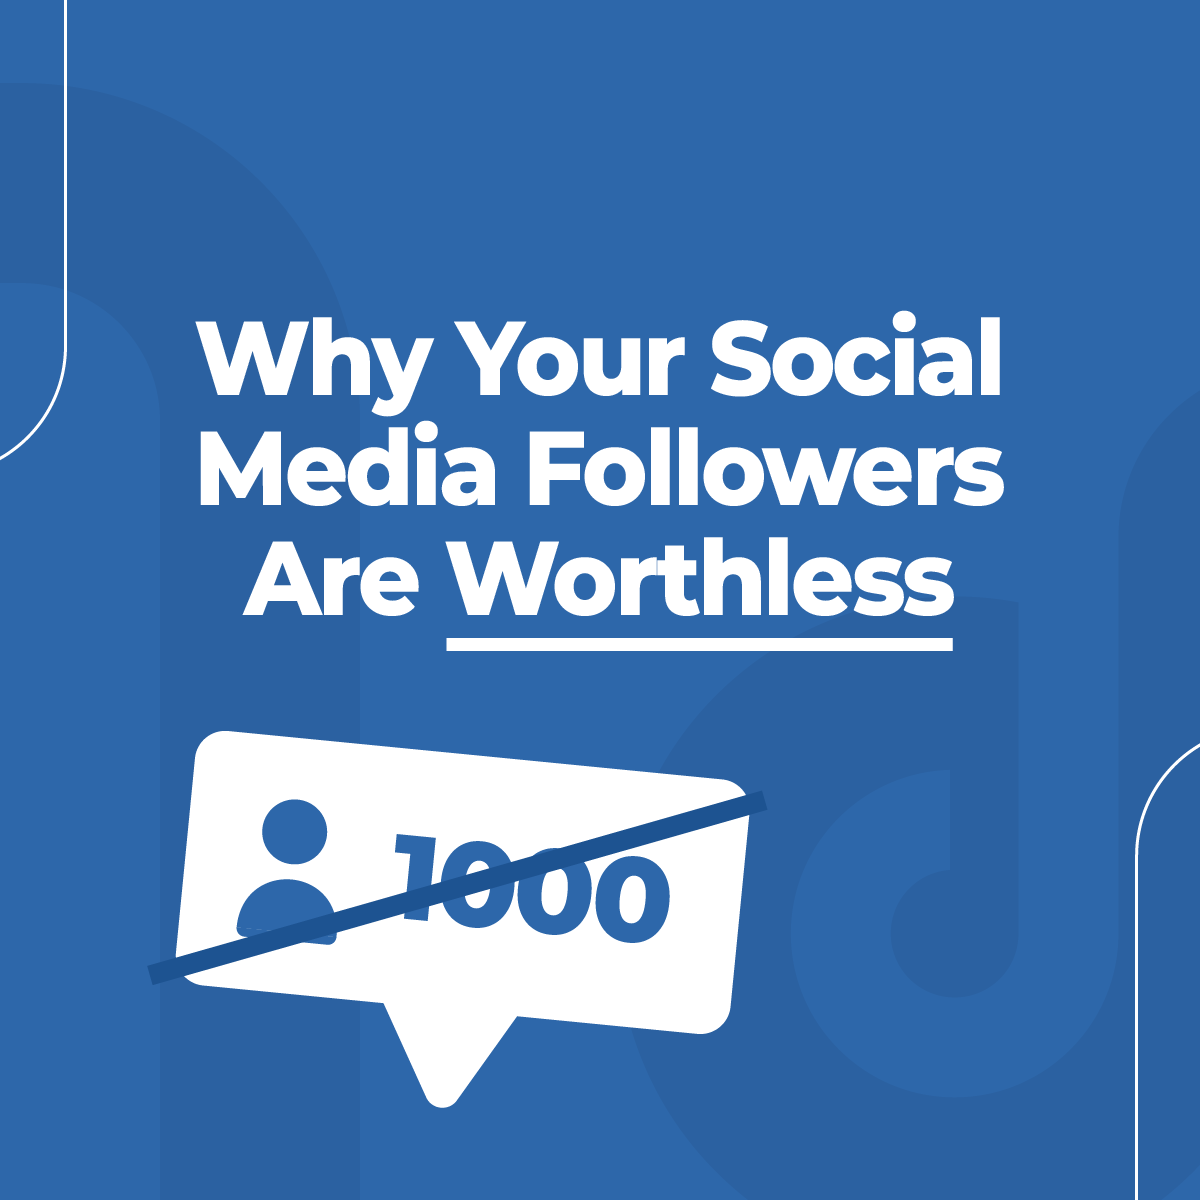 Why Your Social Media Followers Are Worthless